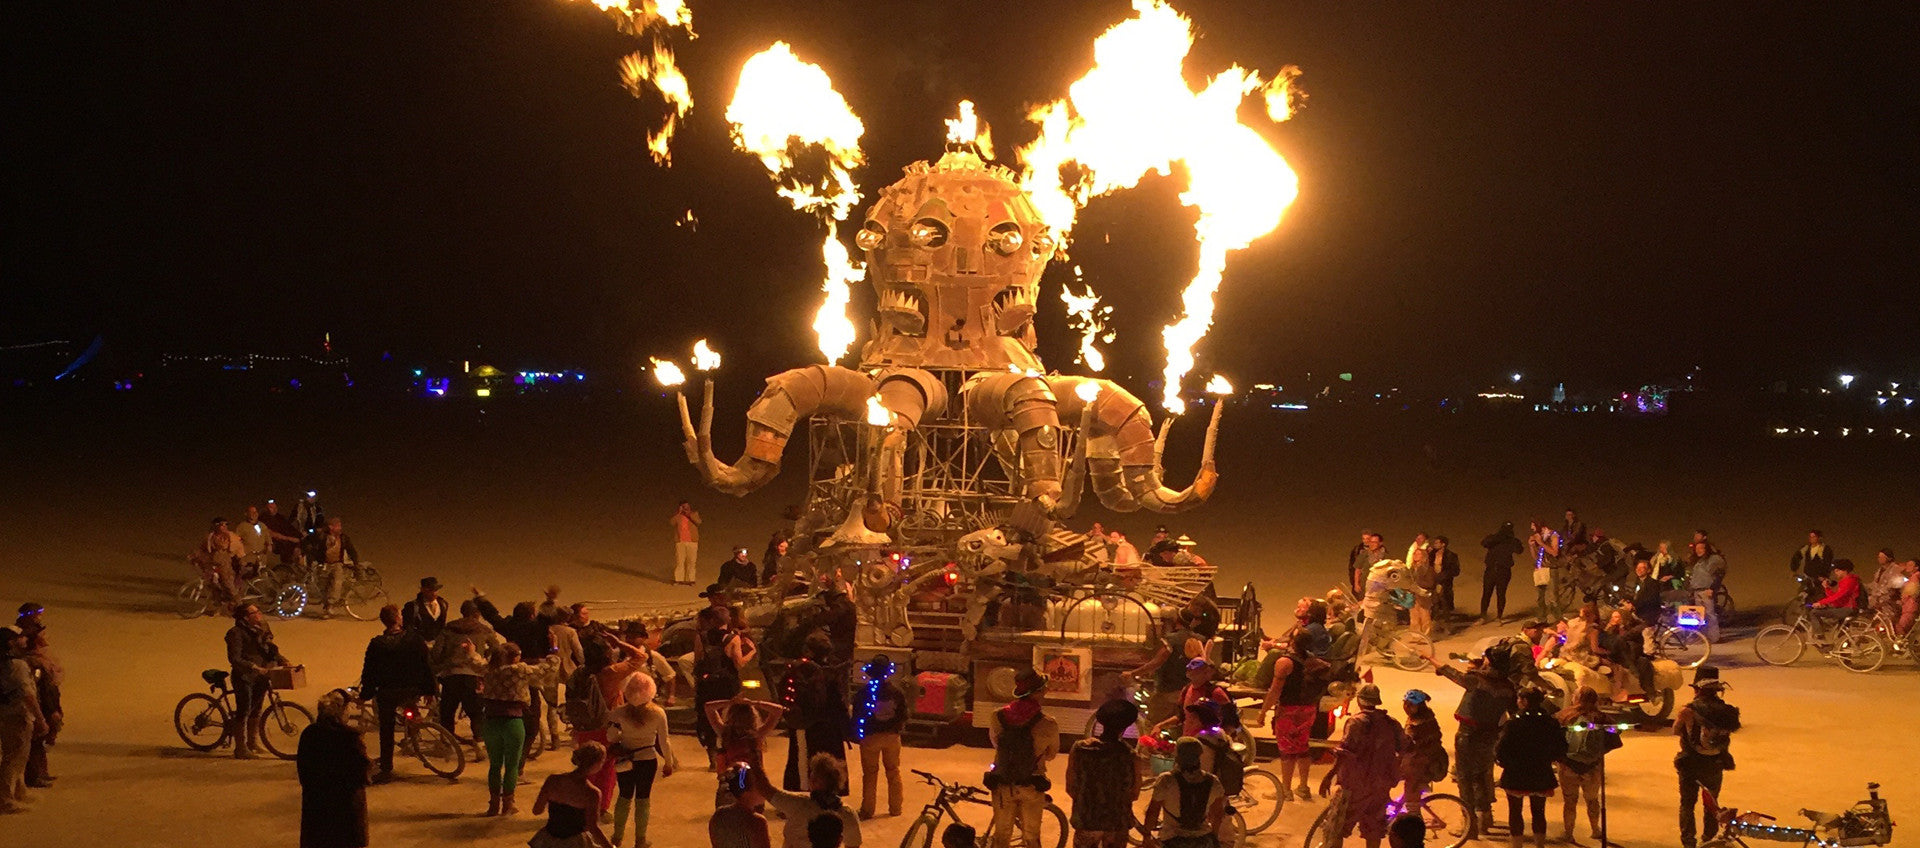 Forget 3 Strikes and You're Out. 3 Hits and You're Out. My Adventures at Burning Man.